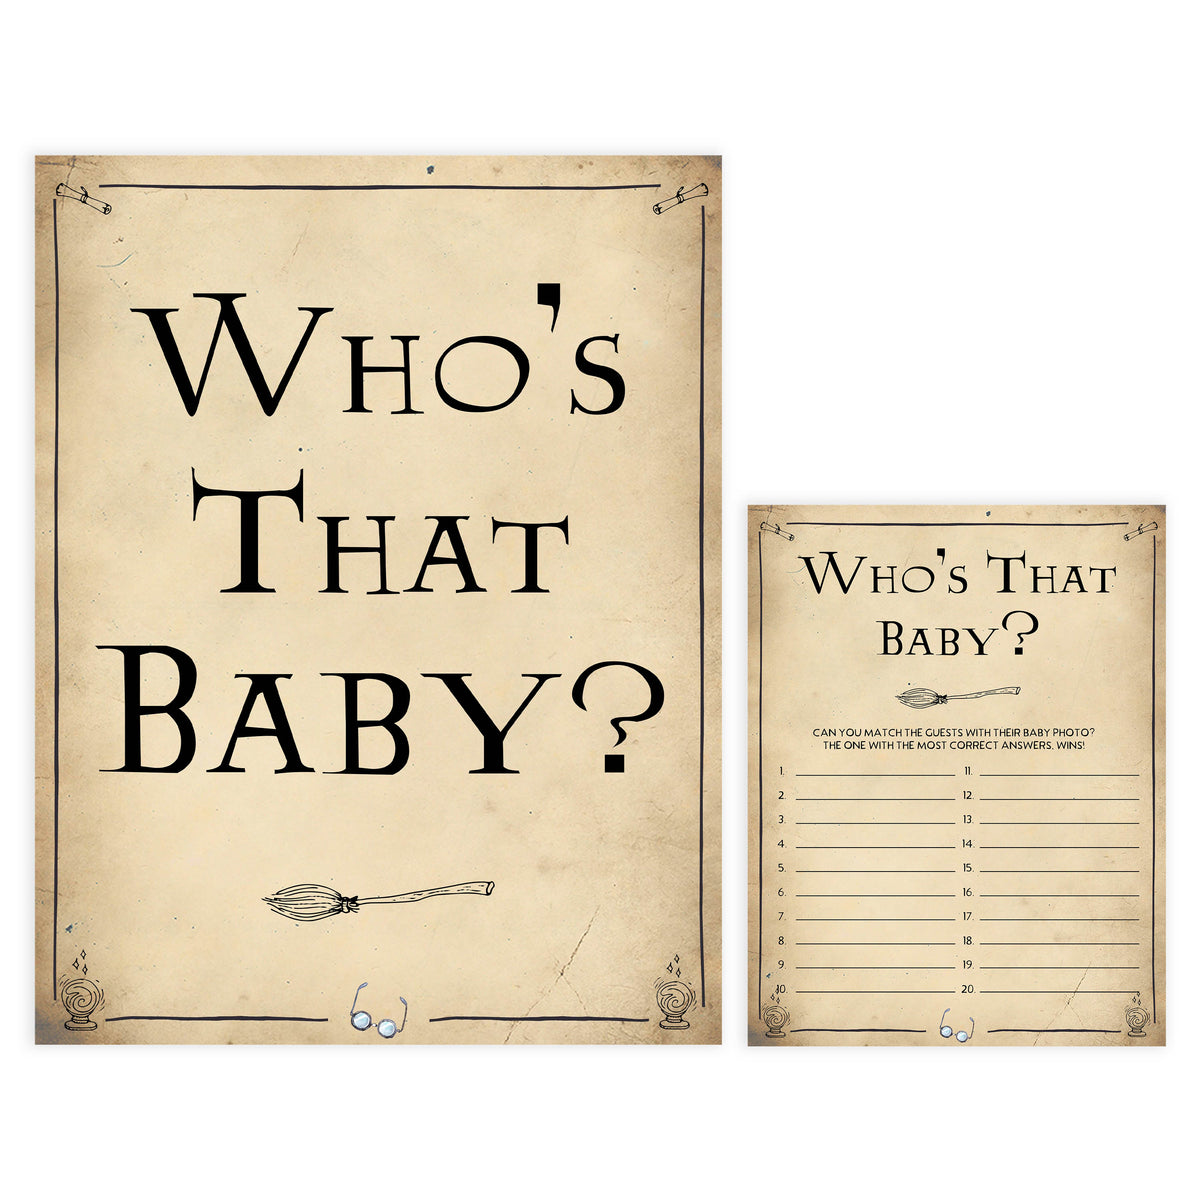 Whos That Baby Face Game, Baby Photo Game, Wizard baby shower games, printable baby shower games, Harry Potter baby games, Harry Potter baby shower, fun baby shower games,  fun baby ideas